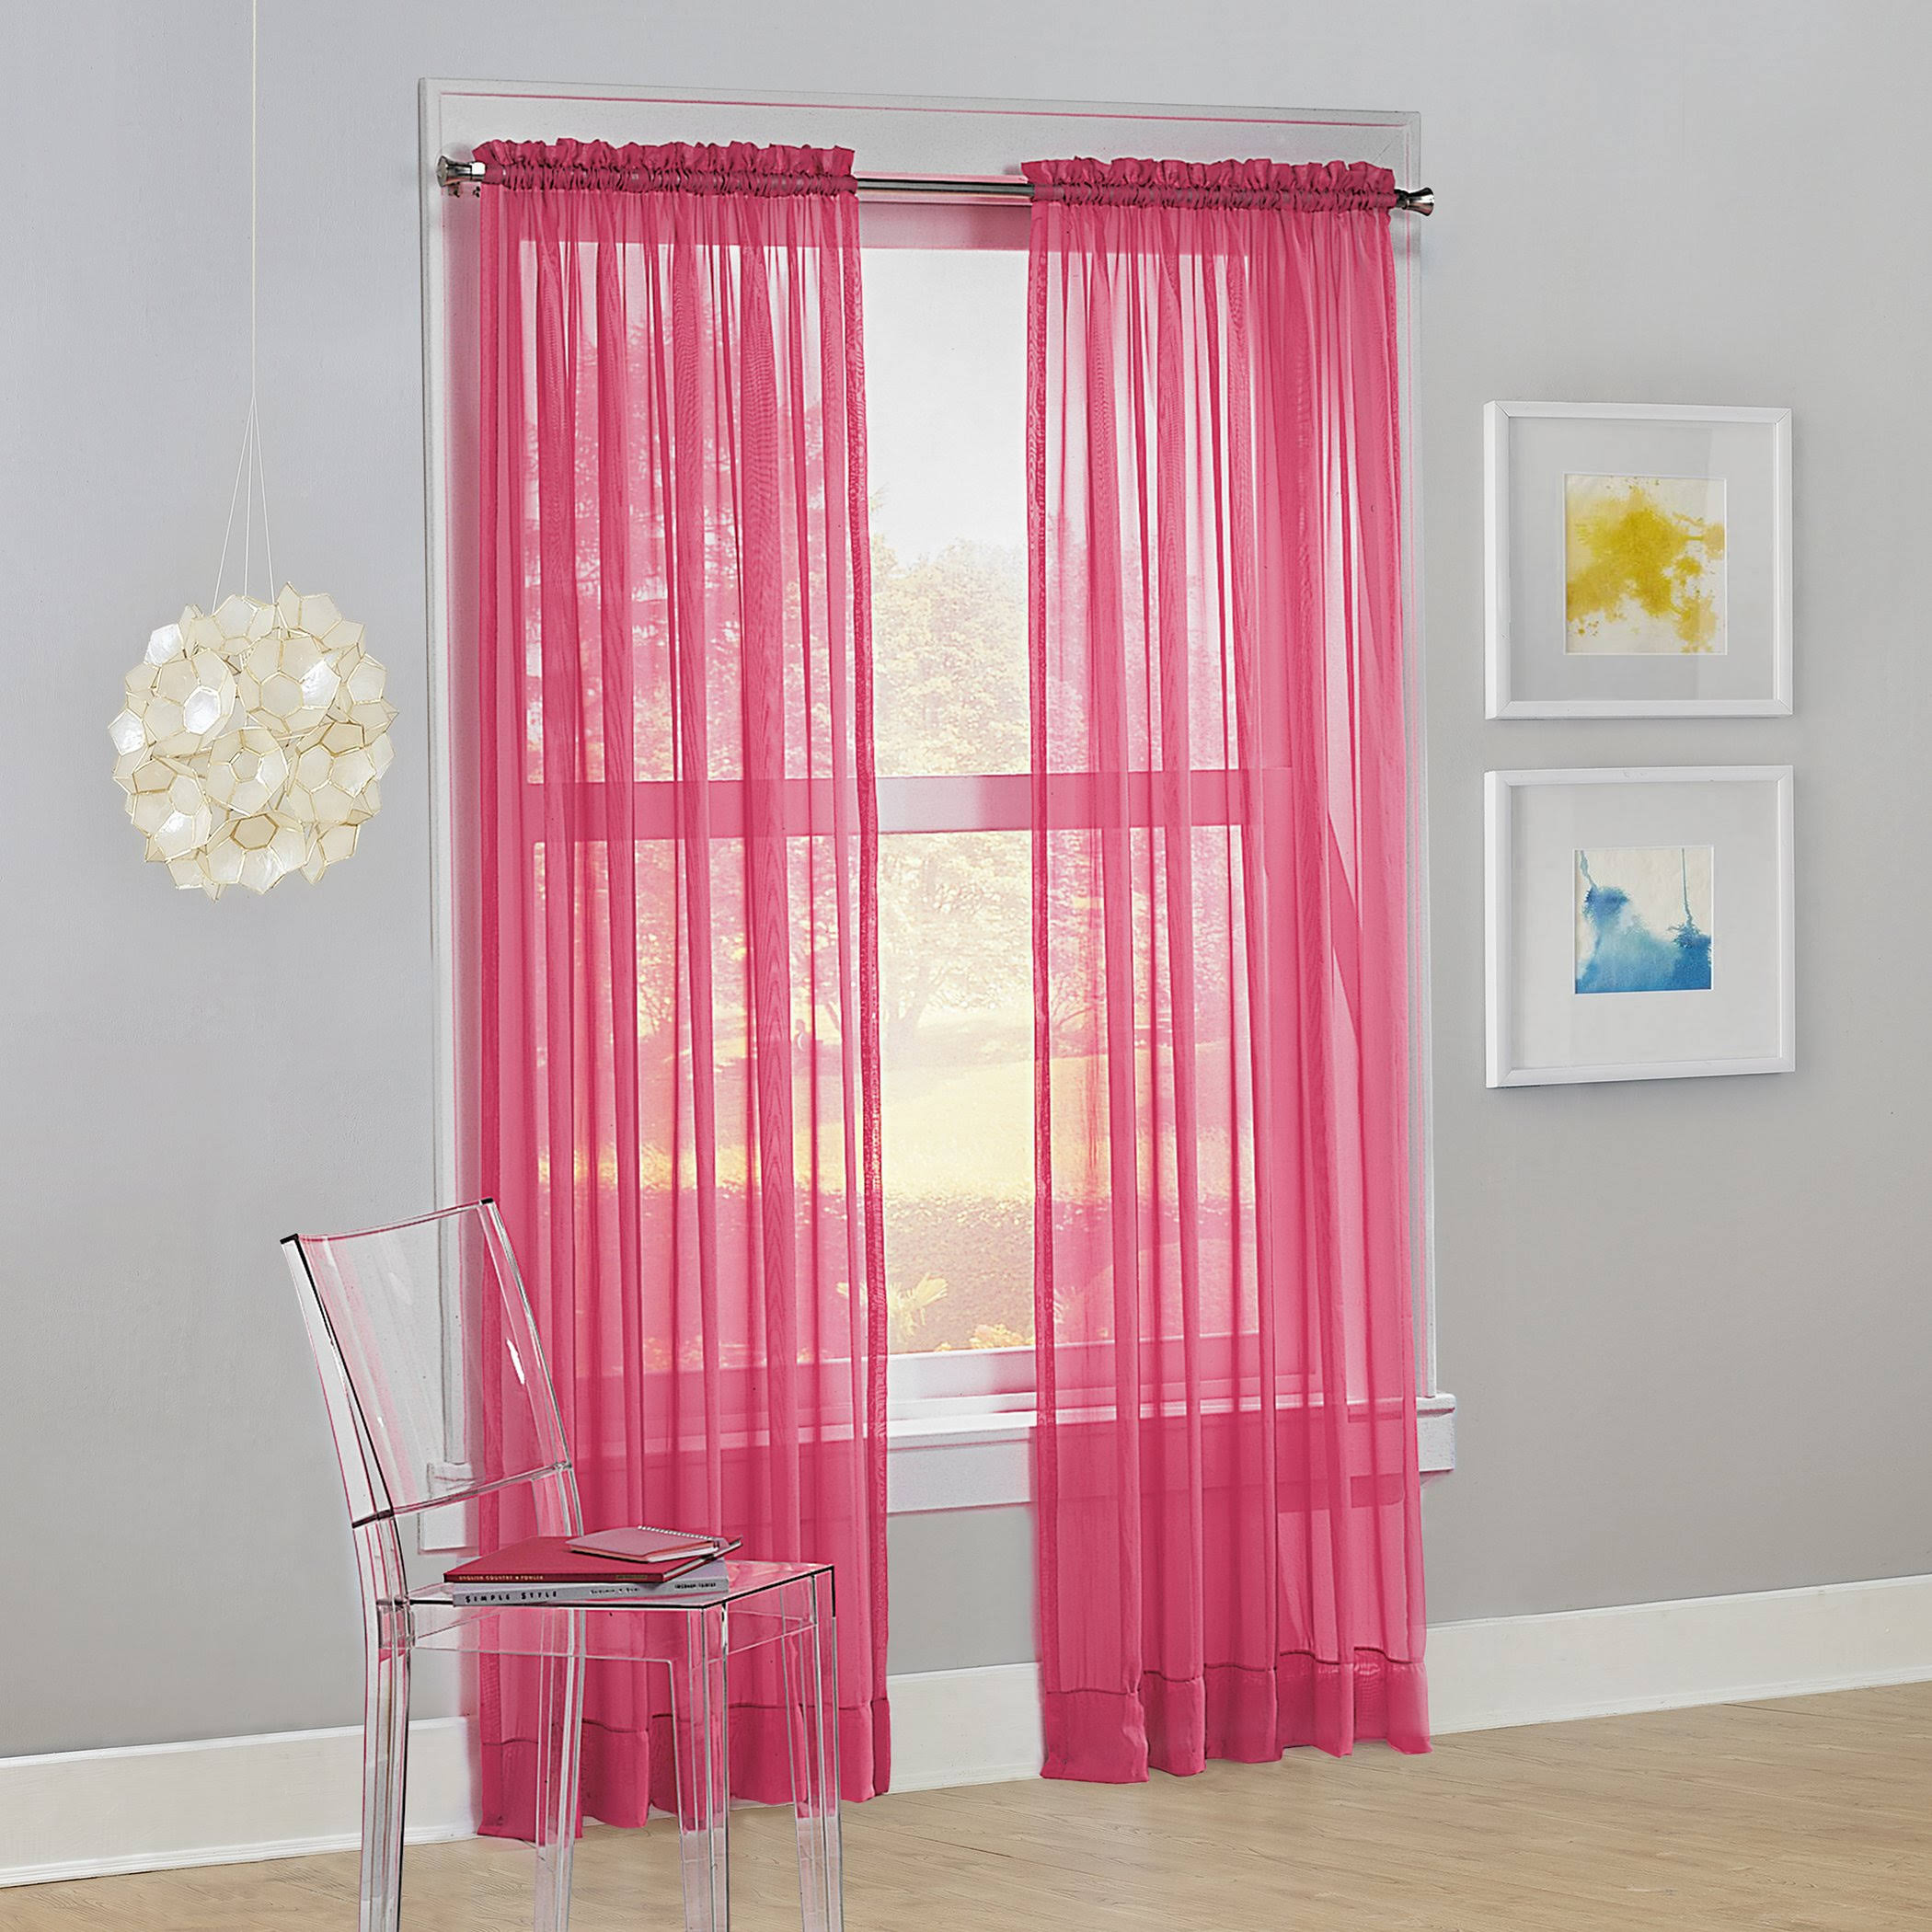 No. 918 Calypso Sheer Voile Rod Pocket Curtain Panel, 59" x 84", Pink